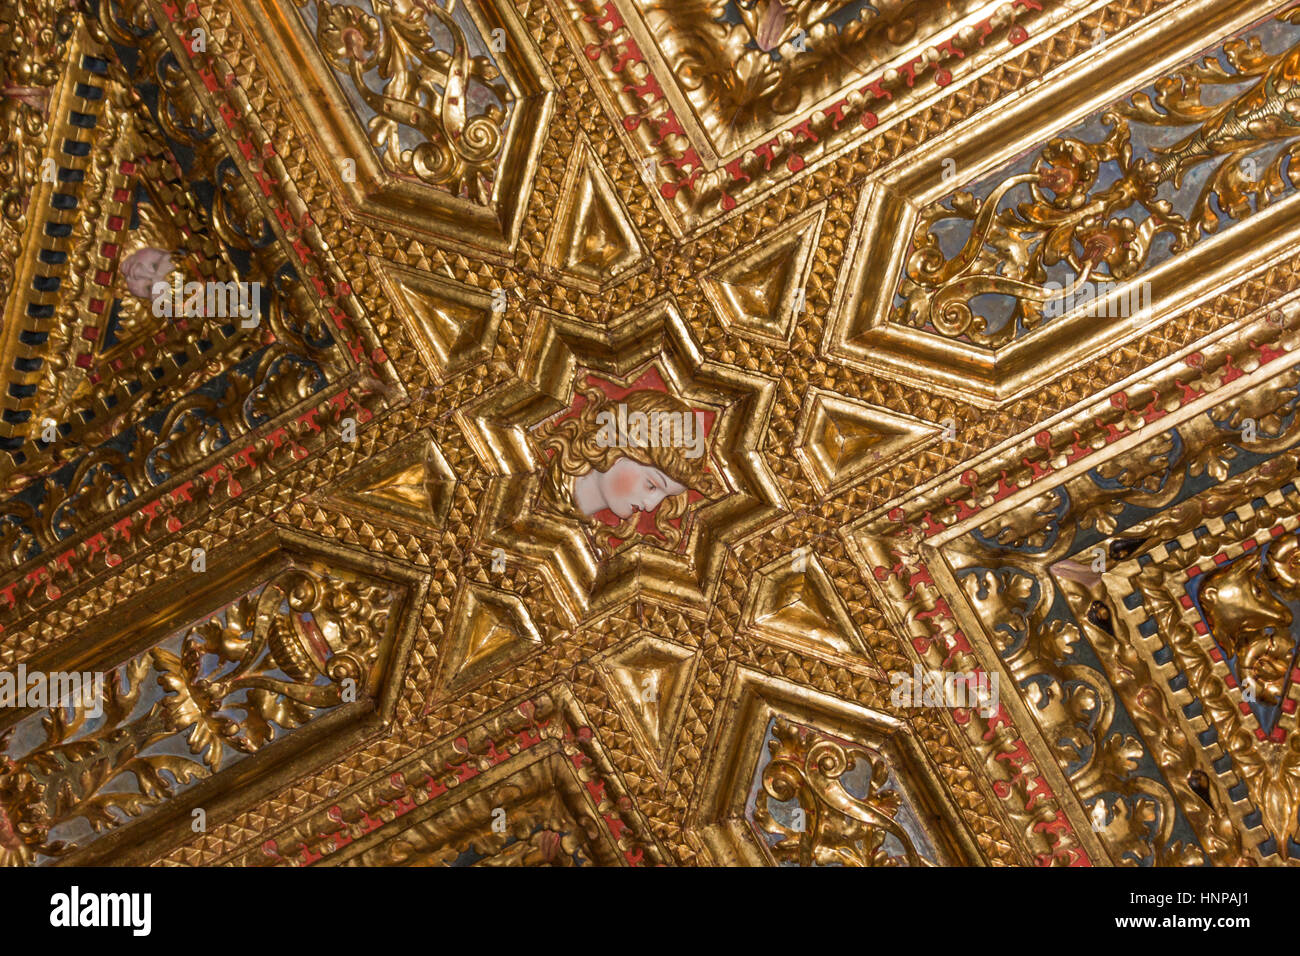 Valencia, Spain.  Ornate ceiling in the Golden Hall in the Palace of  The Generalitat Valenciana or La Generalidad Valenciana. Stock Photo